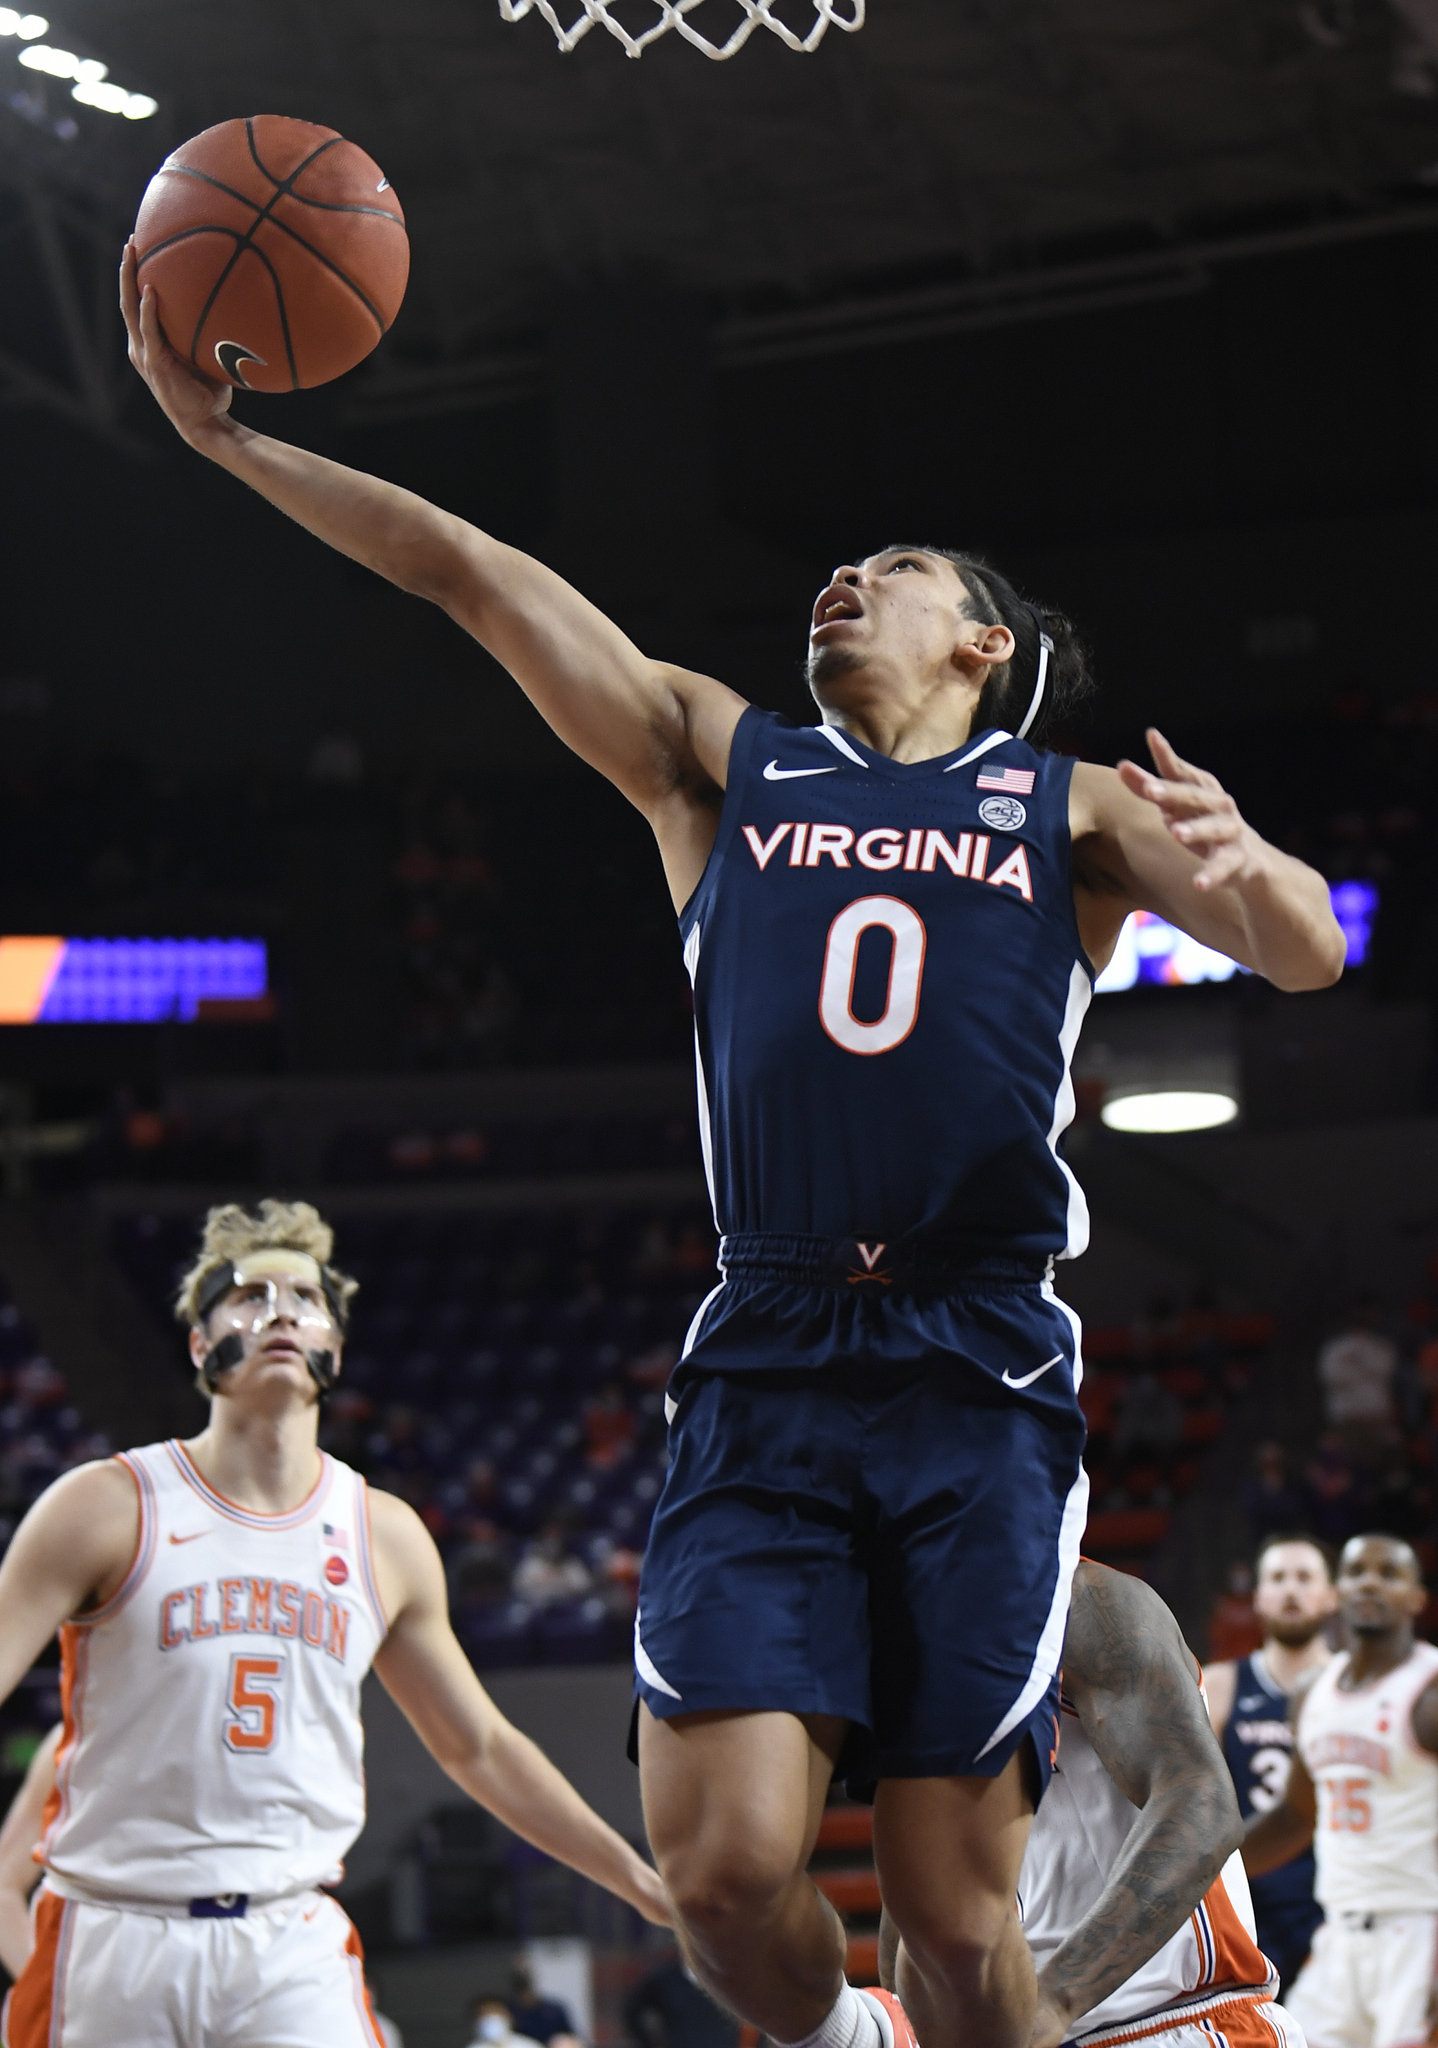 Virginia lost its first ACC game of the season.